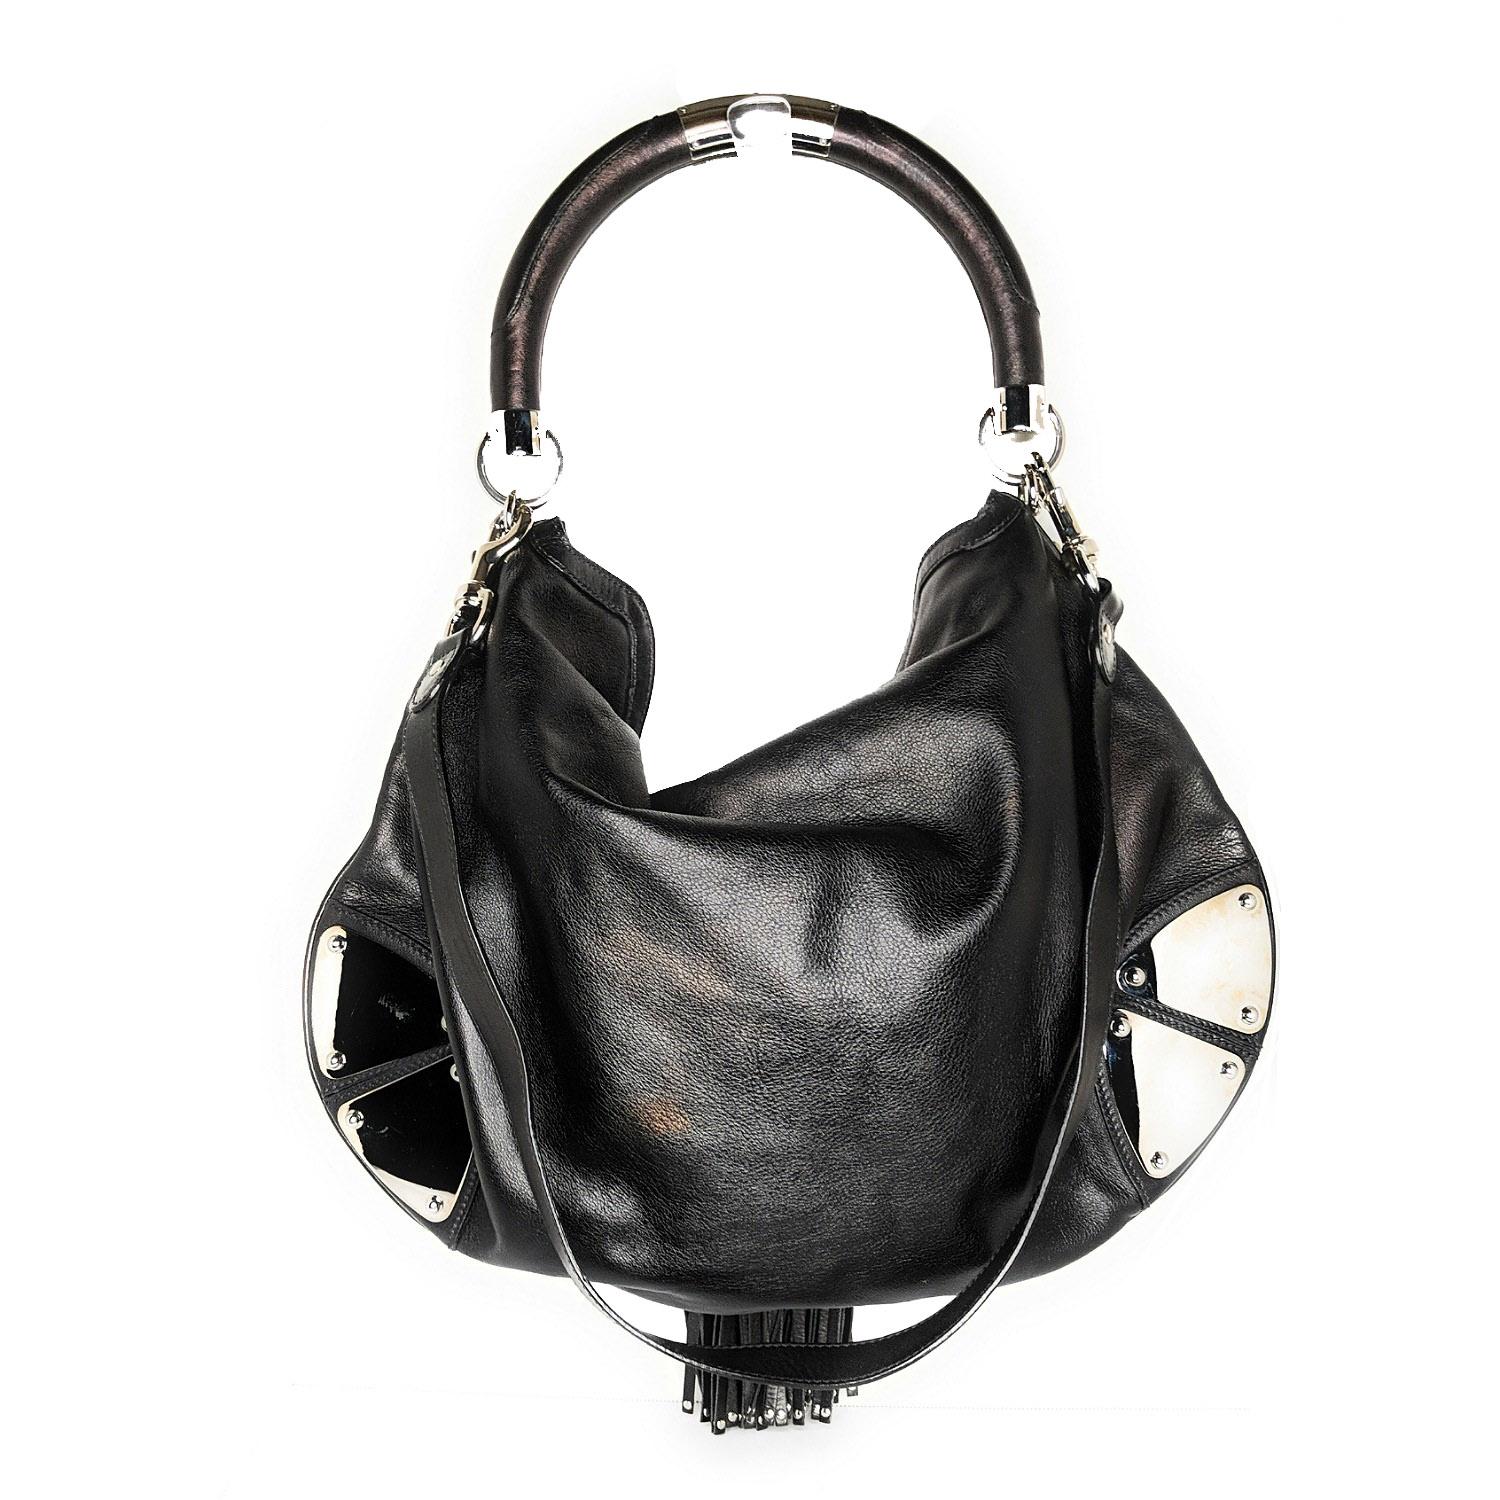 We can always count on Gucci for styles that we love now and later. This gorgeous Gucci Black Leather Large Babouska Indy Top Handle Bag features a chic hobo design with a top handle with a metal Gucci logo, double tassels with bamboo details. This